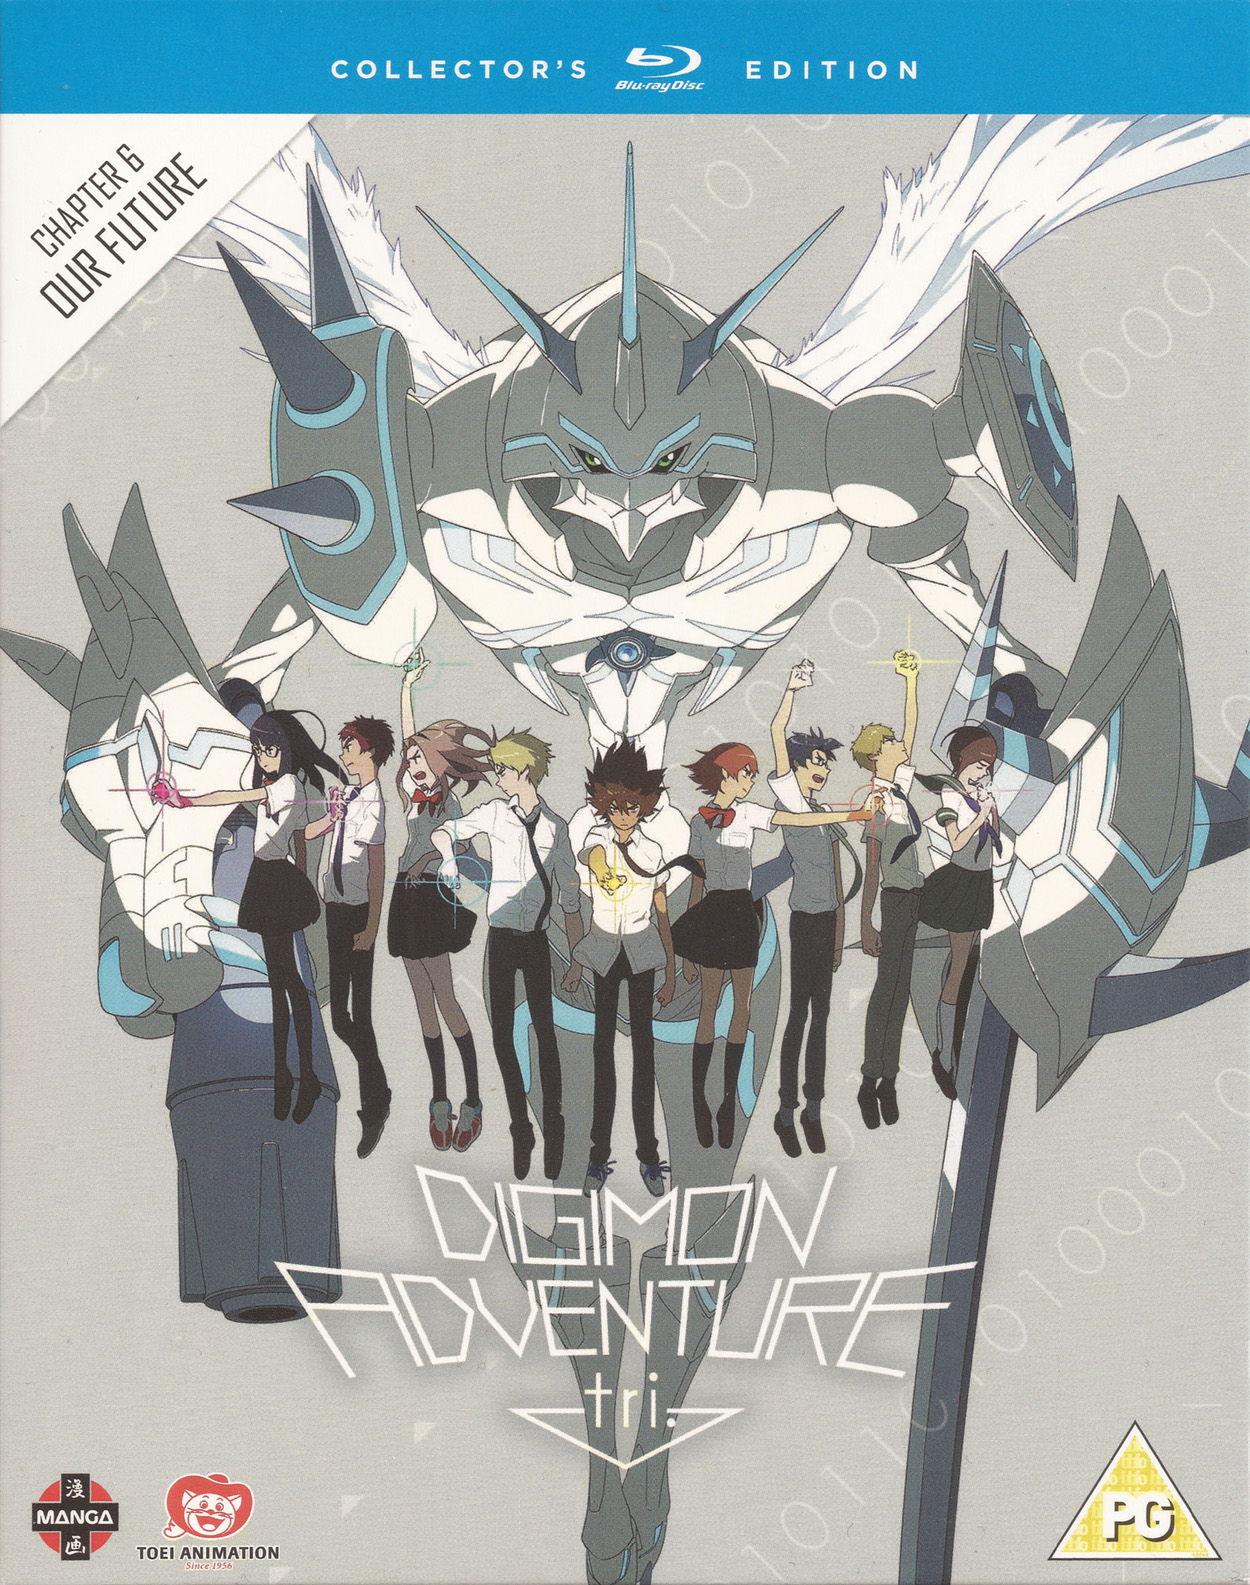 Digimon Adventure tri – Chapter 2 gets release date, Chapter 1 heading for  DVD/Blu-ray